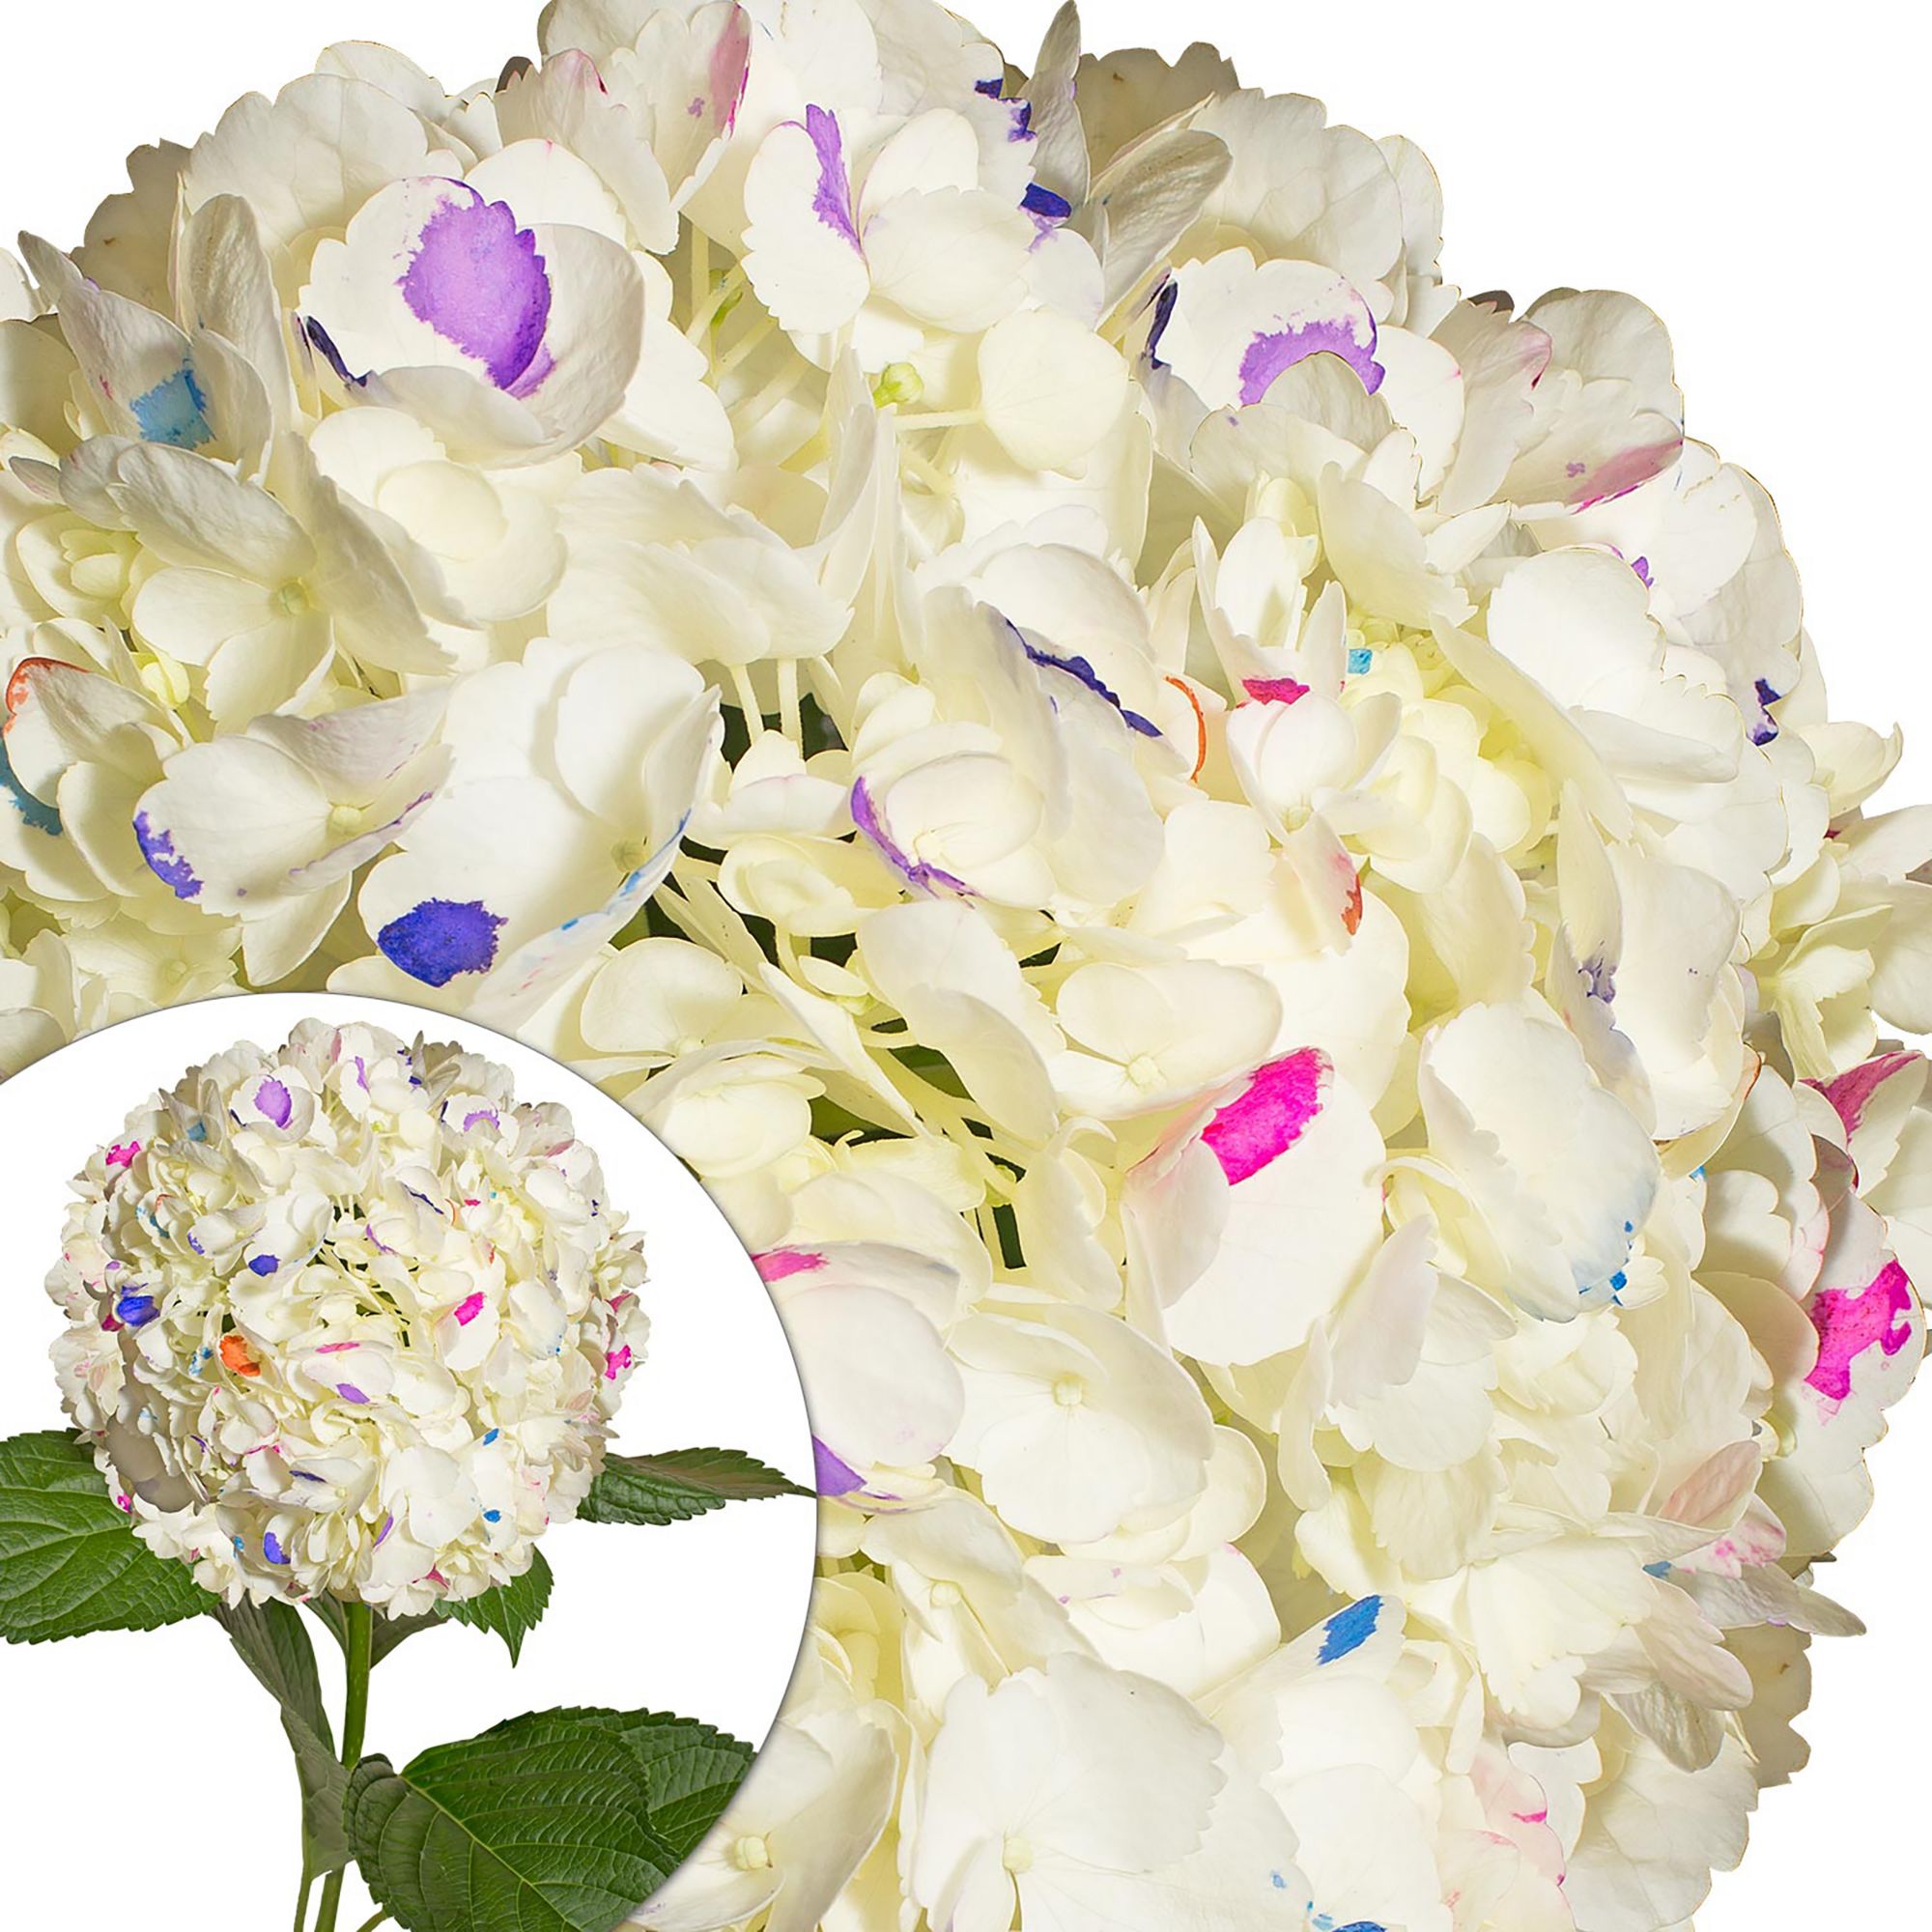 Hand-Painted Hydrangeas, 26 Stems - Party